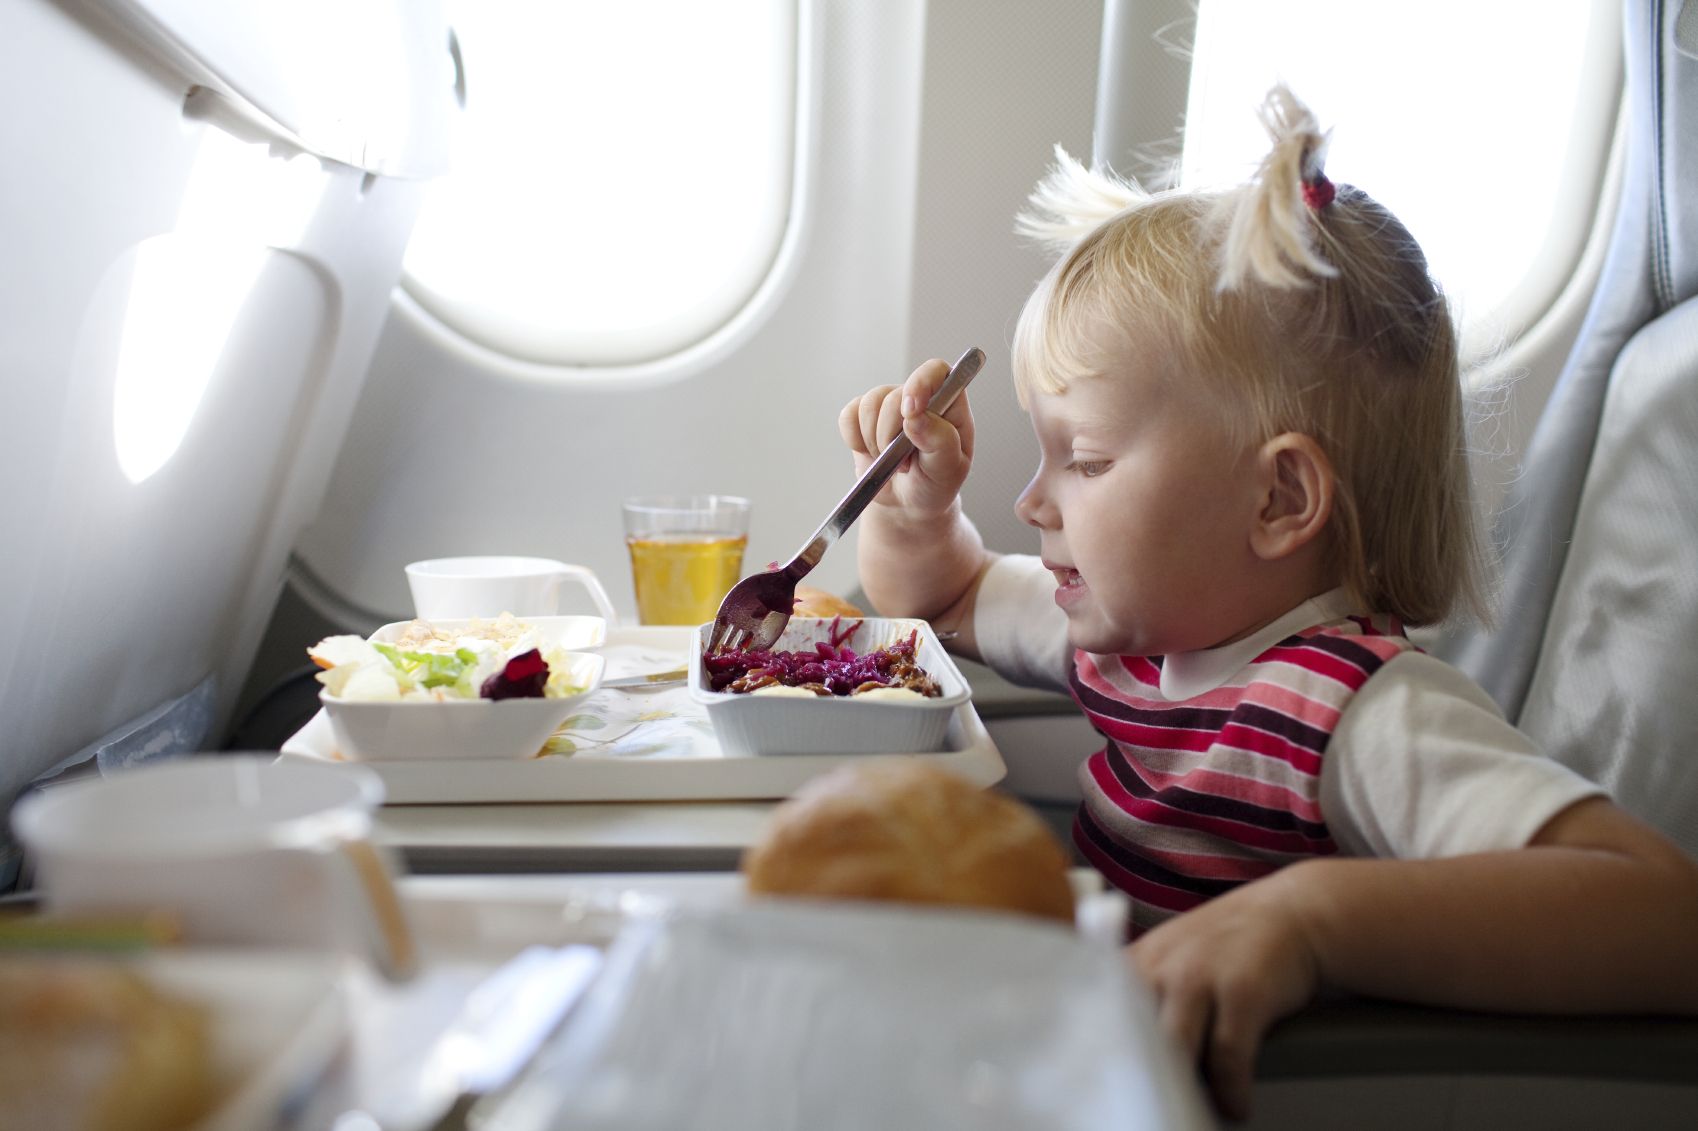 Eating in the airplane